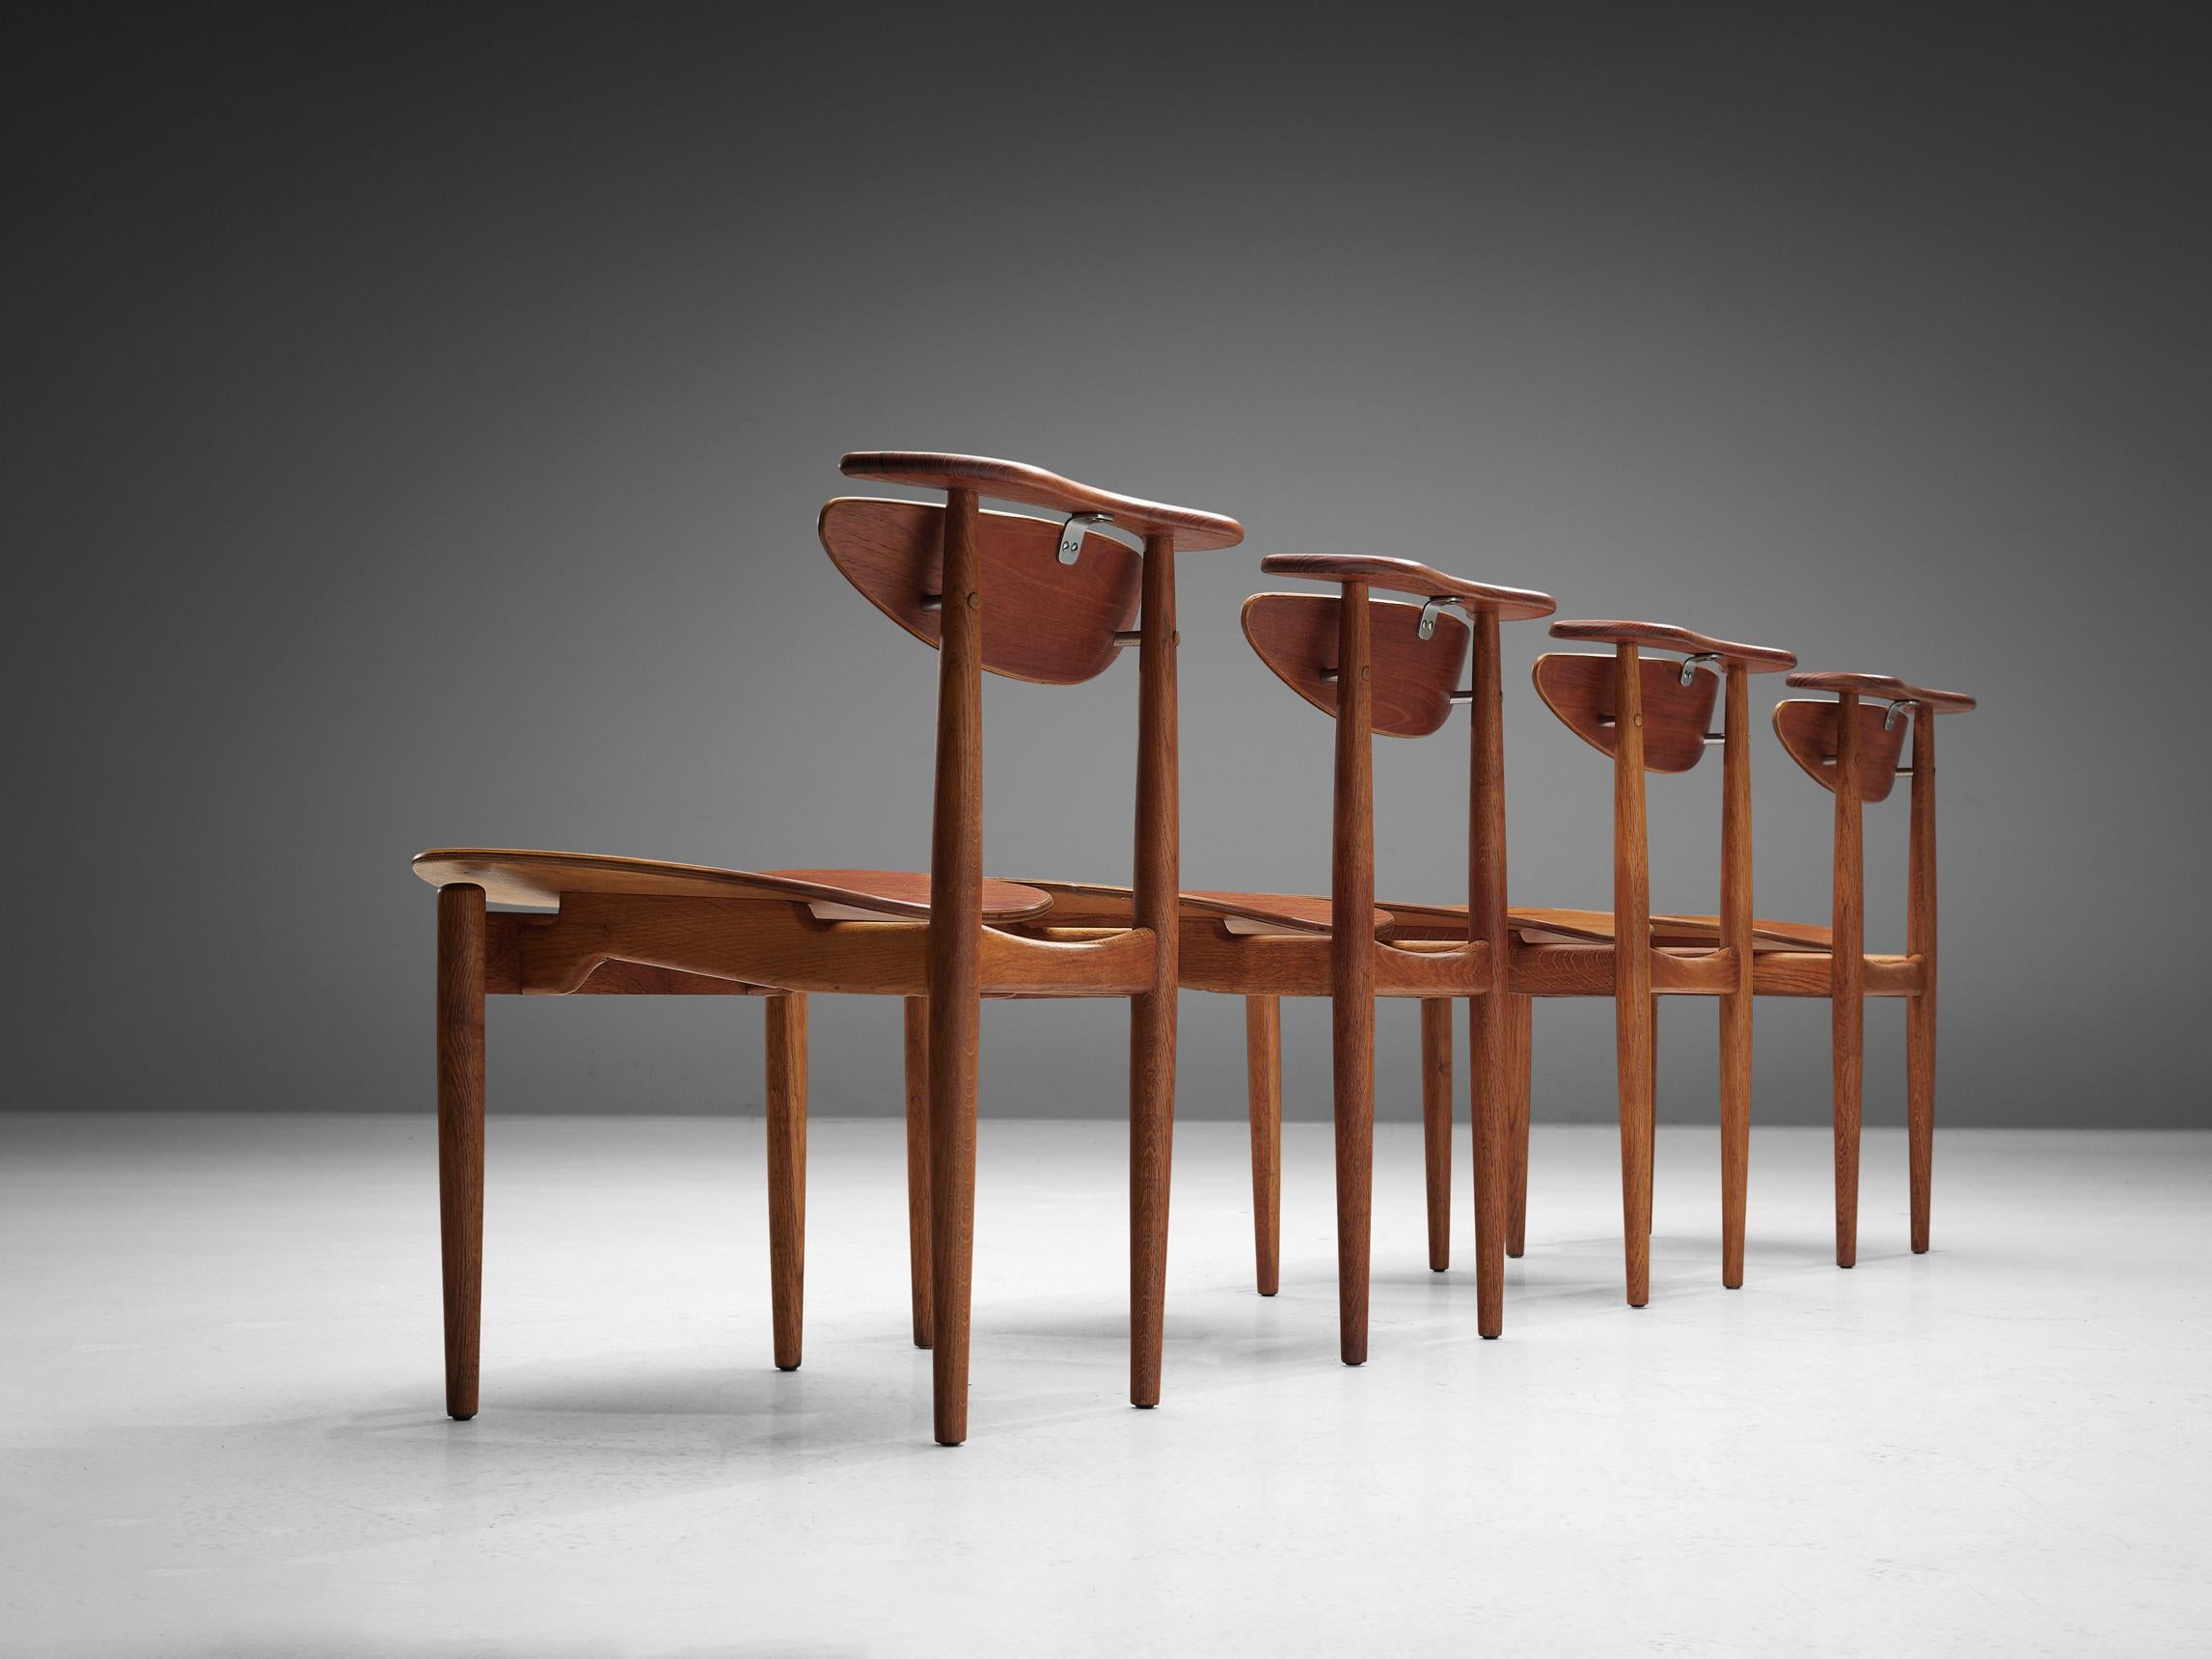 Finn Juhl for Bovirke, set of four 'reading' dining chairs, oak, teak, metal, Denmark, 1953

In 1953, Finn Juhl designed this 'Reading Chair' for Bovirke. The chair is organically shaped featuring curvaceous forms and round finishes. The backrest